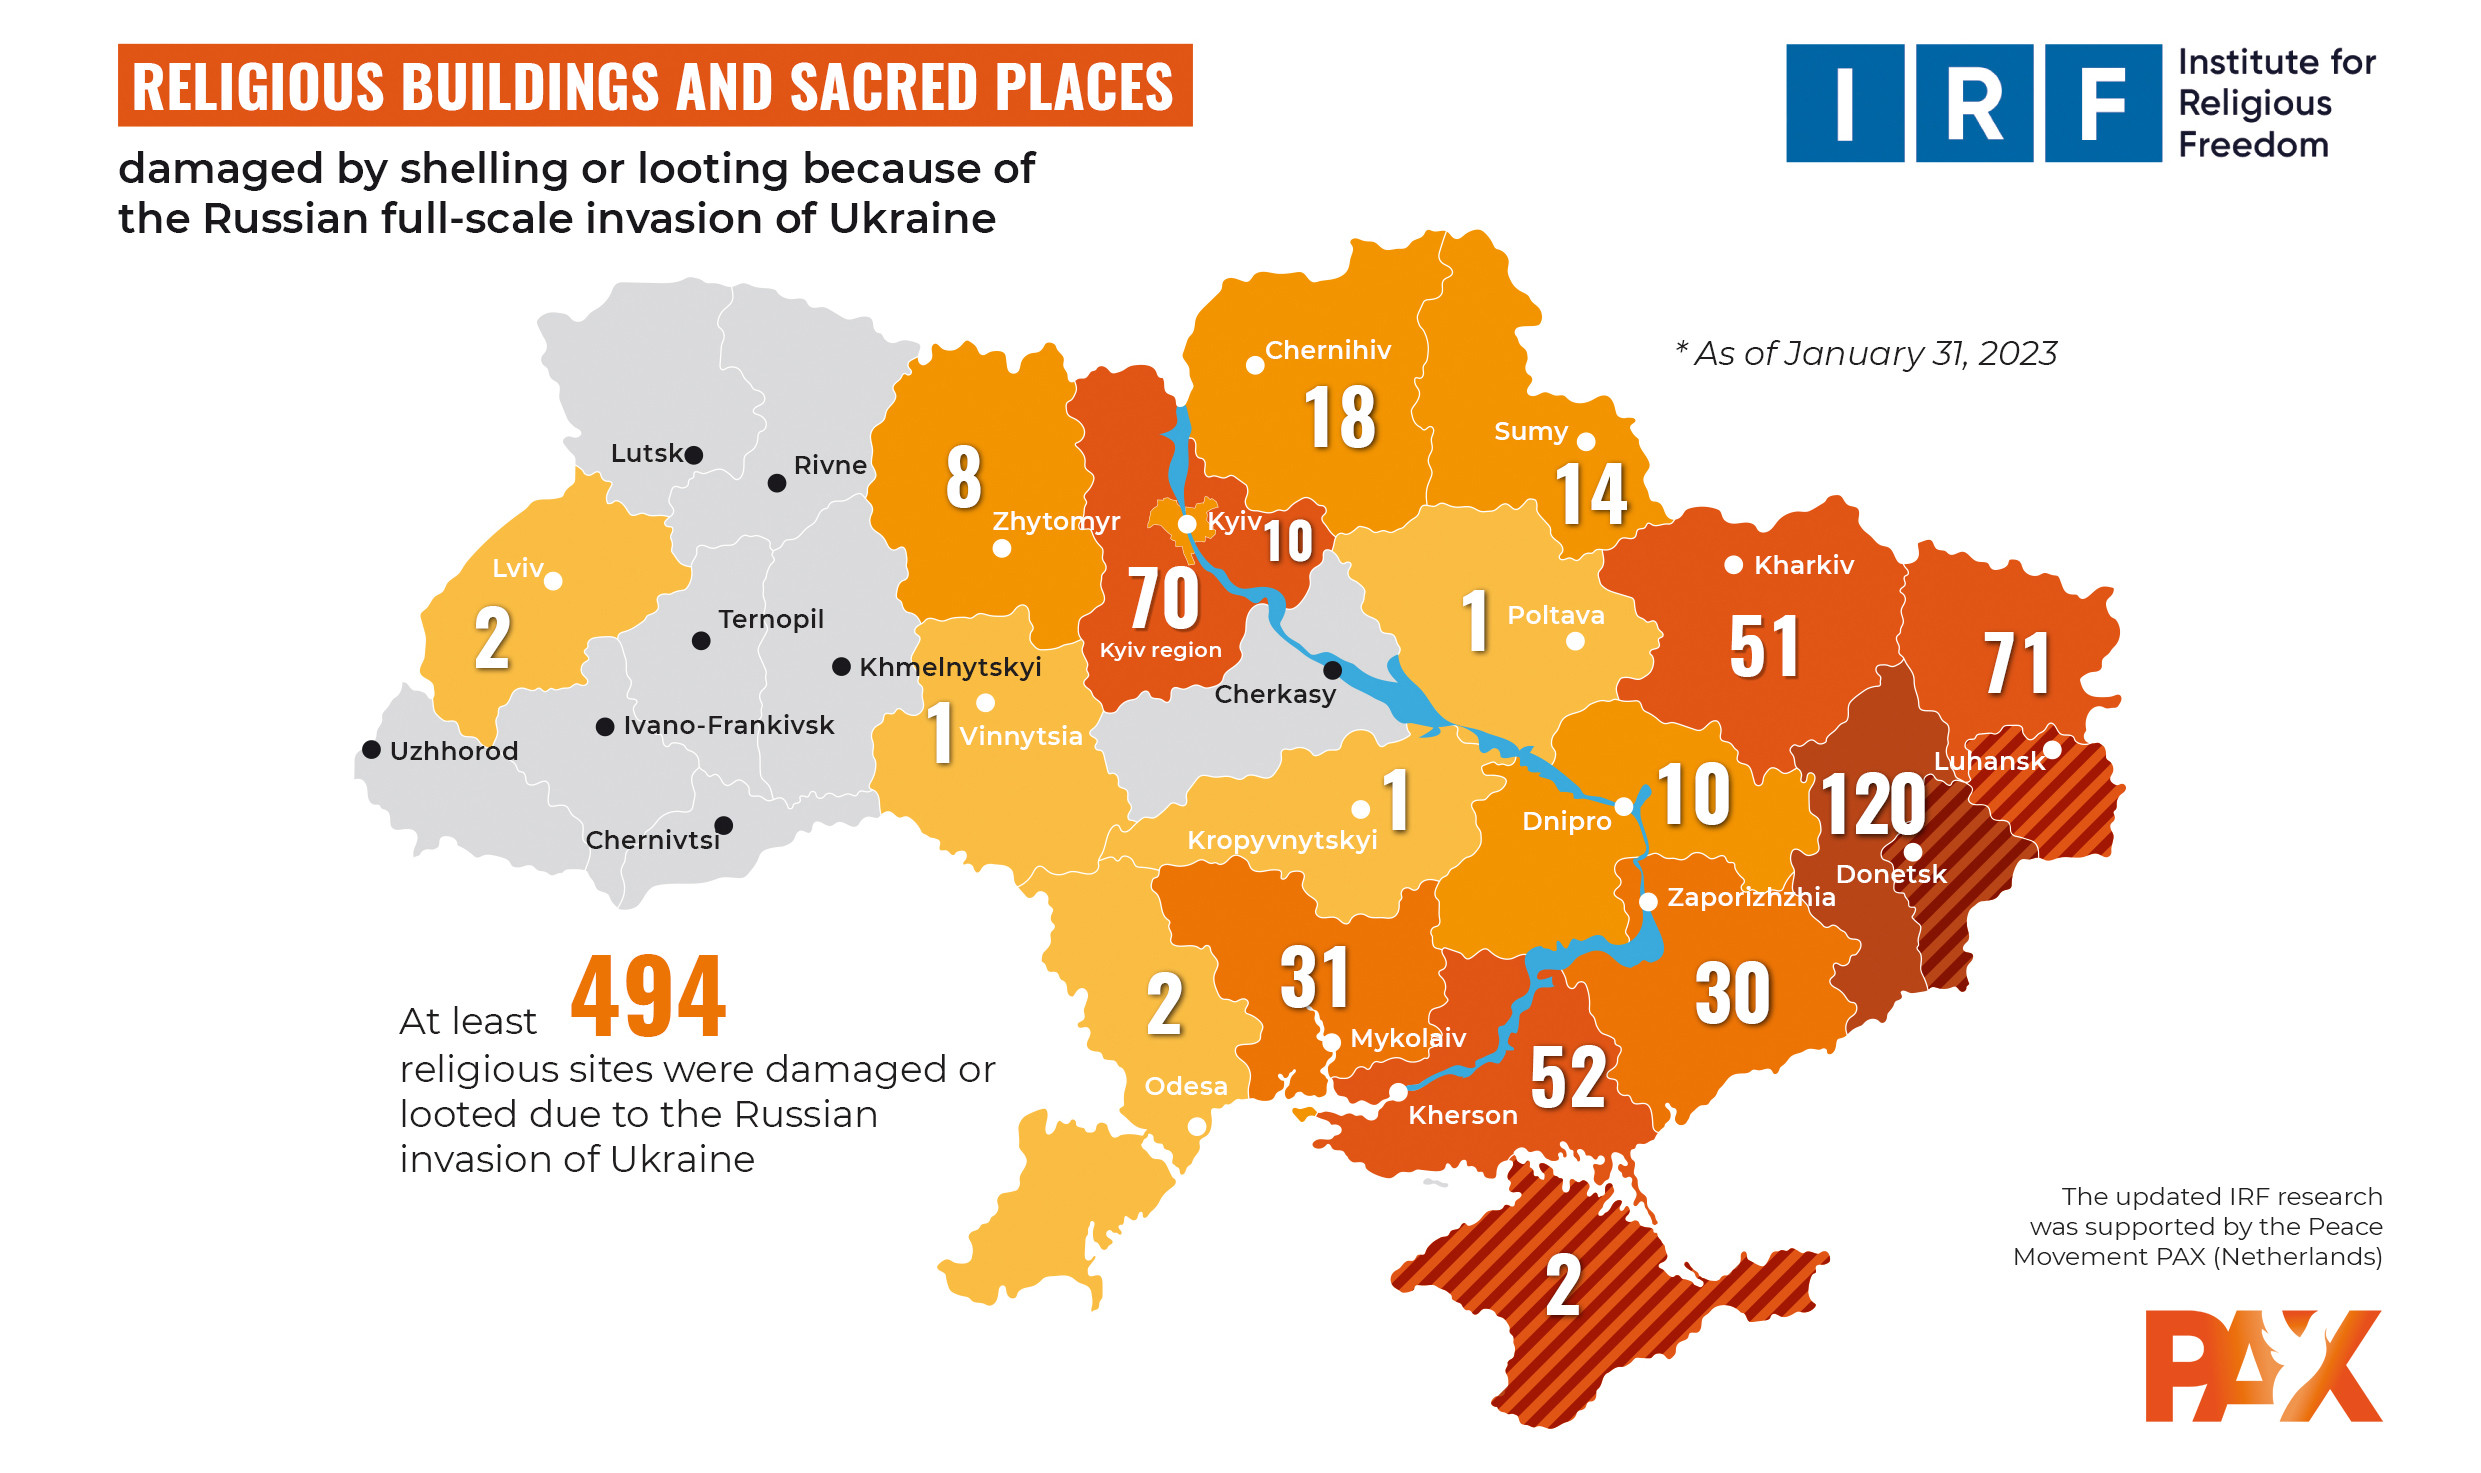 The number of religious infrastructure facilities in Ukraine damaged during the Russian full-scale invasion of Ukraine, as of January 31, 2023